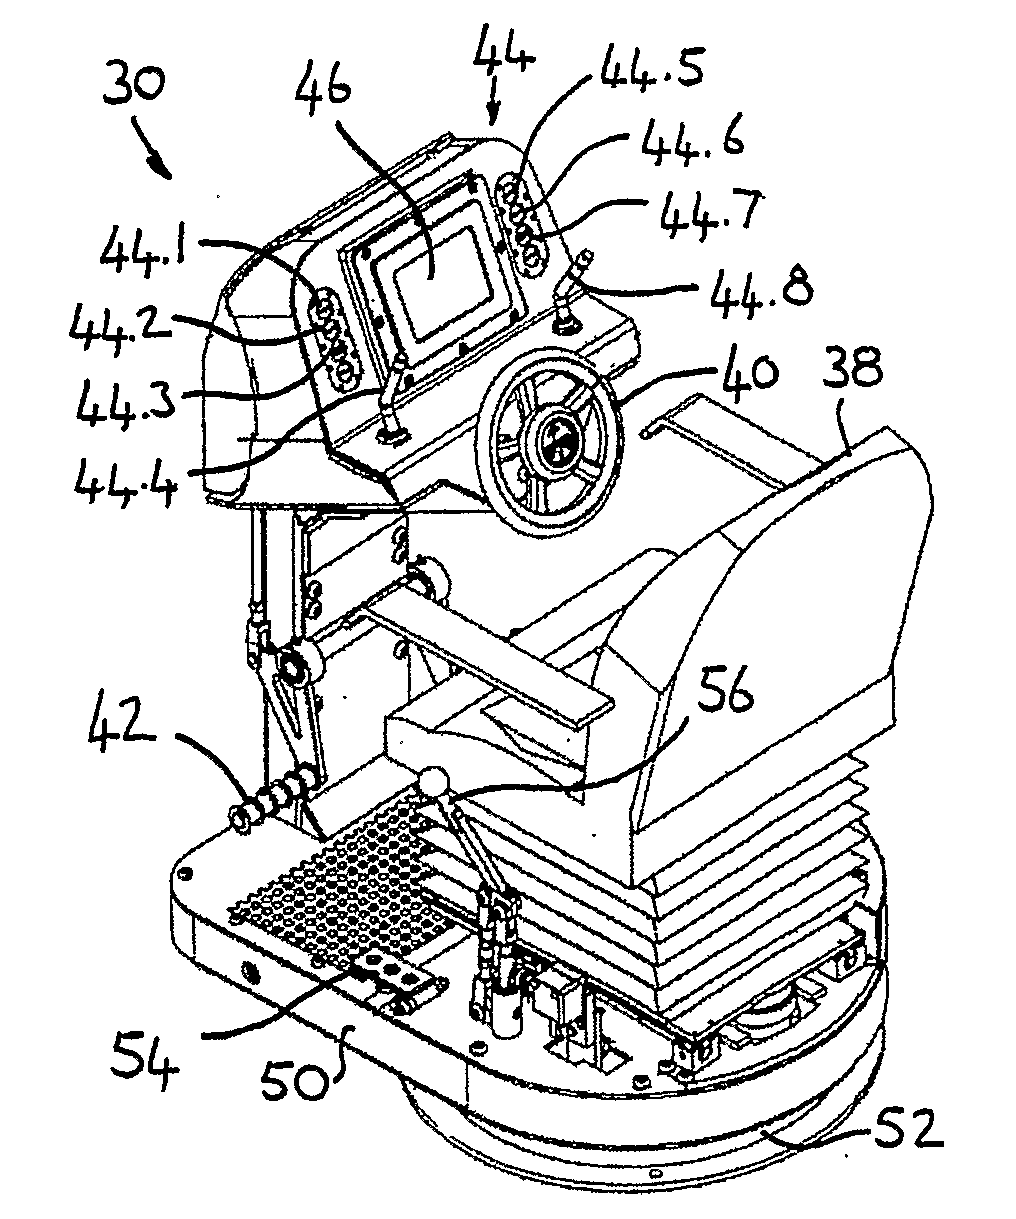 Vehicle with a variable driver position